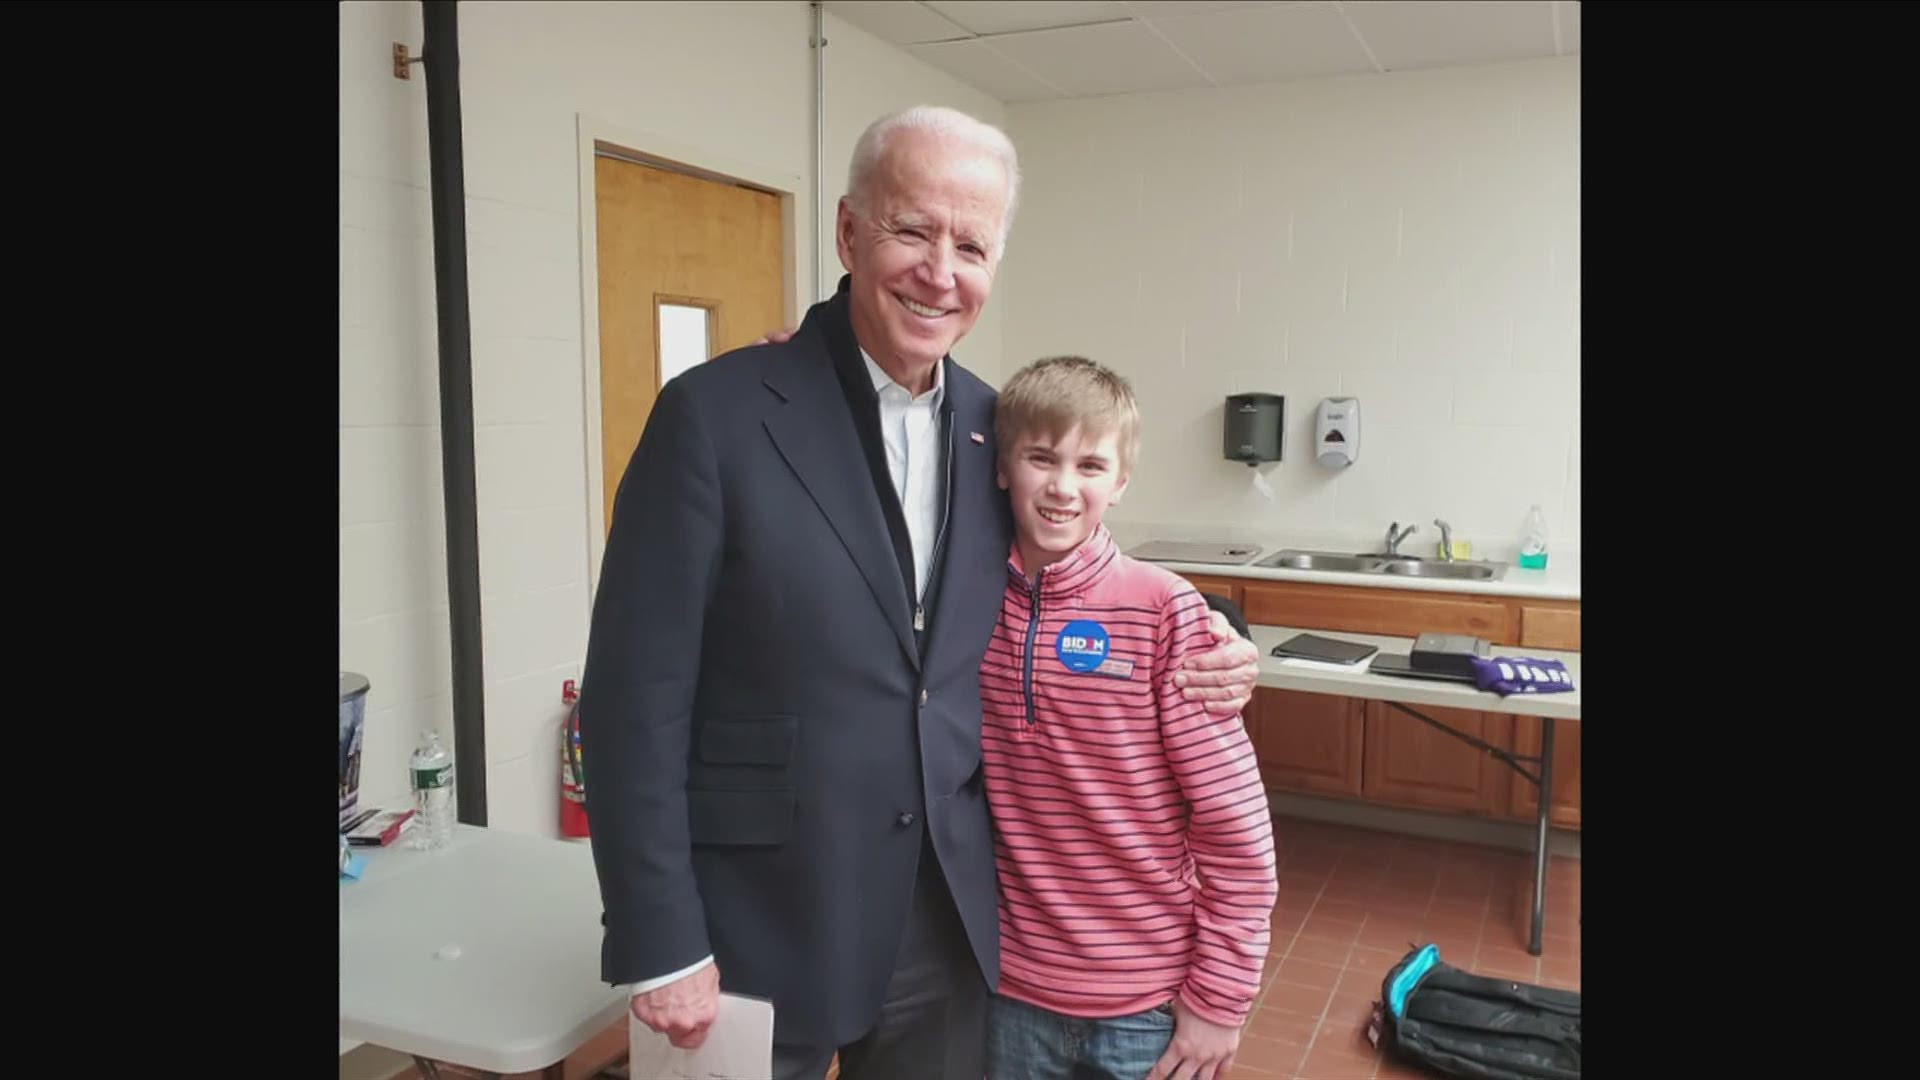 13-year-old Brayden Harrington, who bonded with Joe Biden over their shared struggle with stuttering, spoke at the Democratic National Convention.